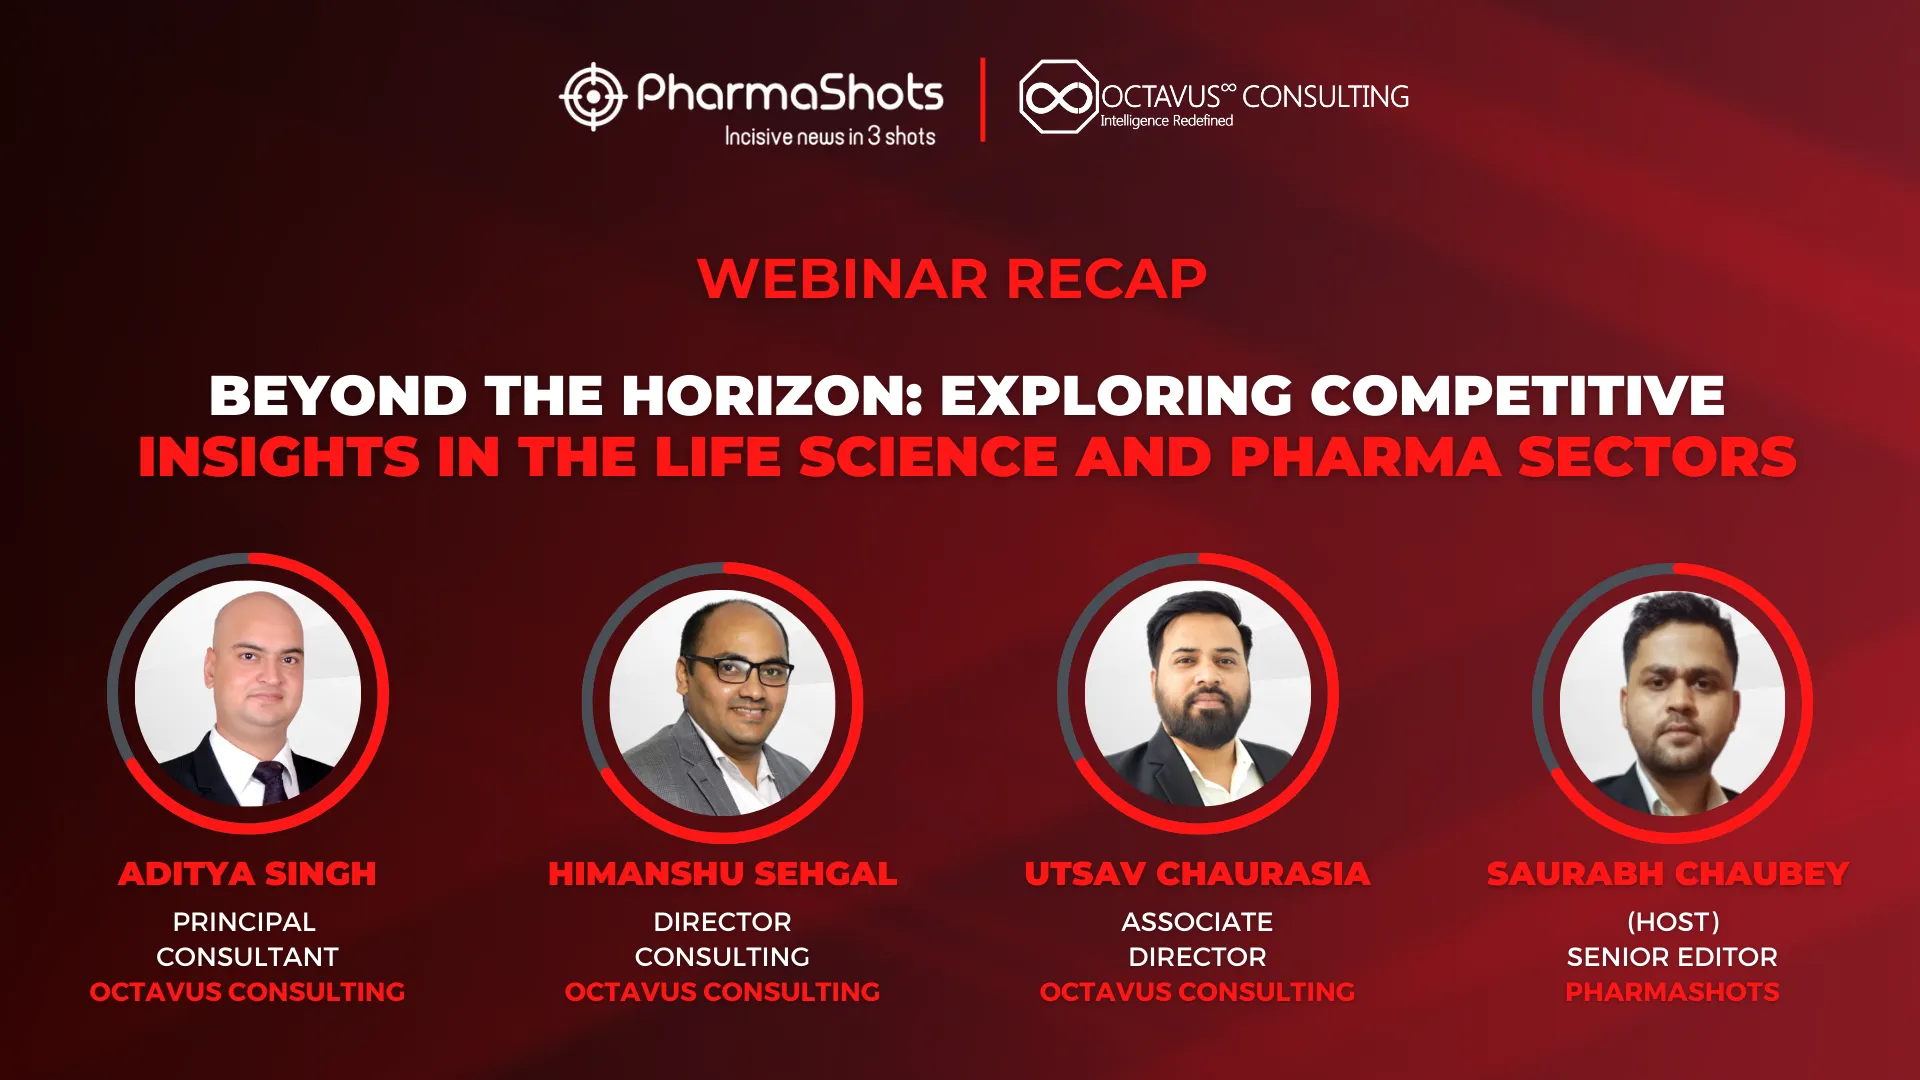 Webinar Recap: Beyond the Horizon: Exploring Competitive Insights in the Life Science and Pharma Sectors